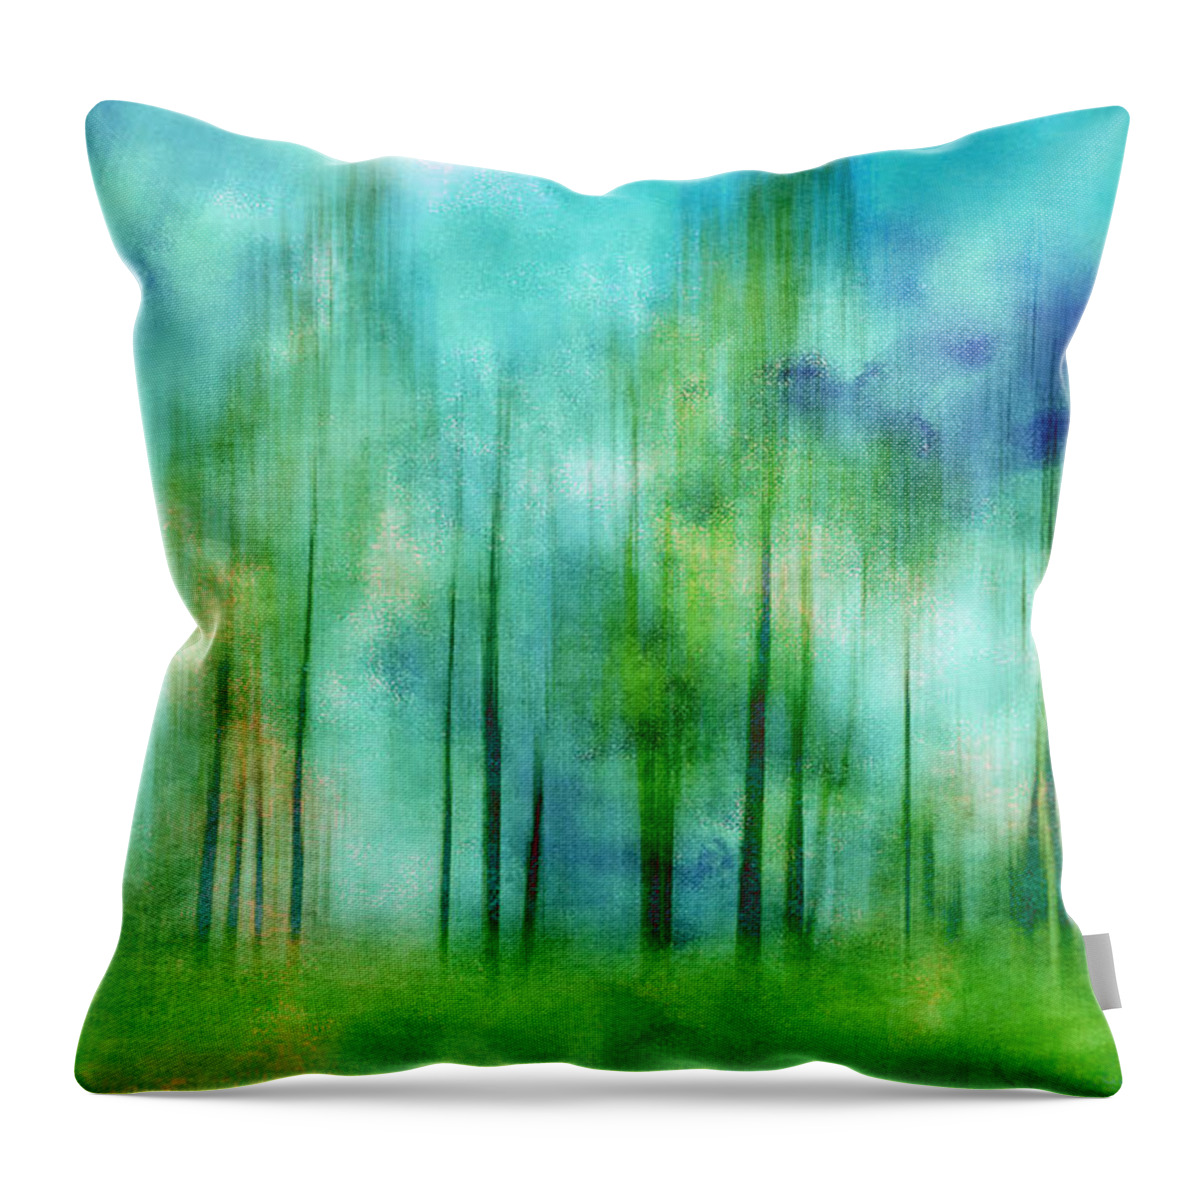 Turquoise Blue Throw Pillow featuring the photograph Sense of Summer by Randi Grace Nilsberg